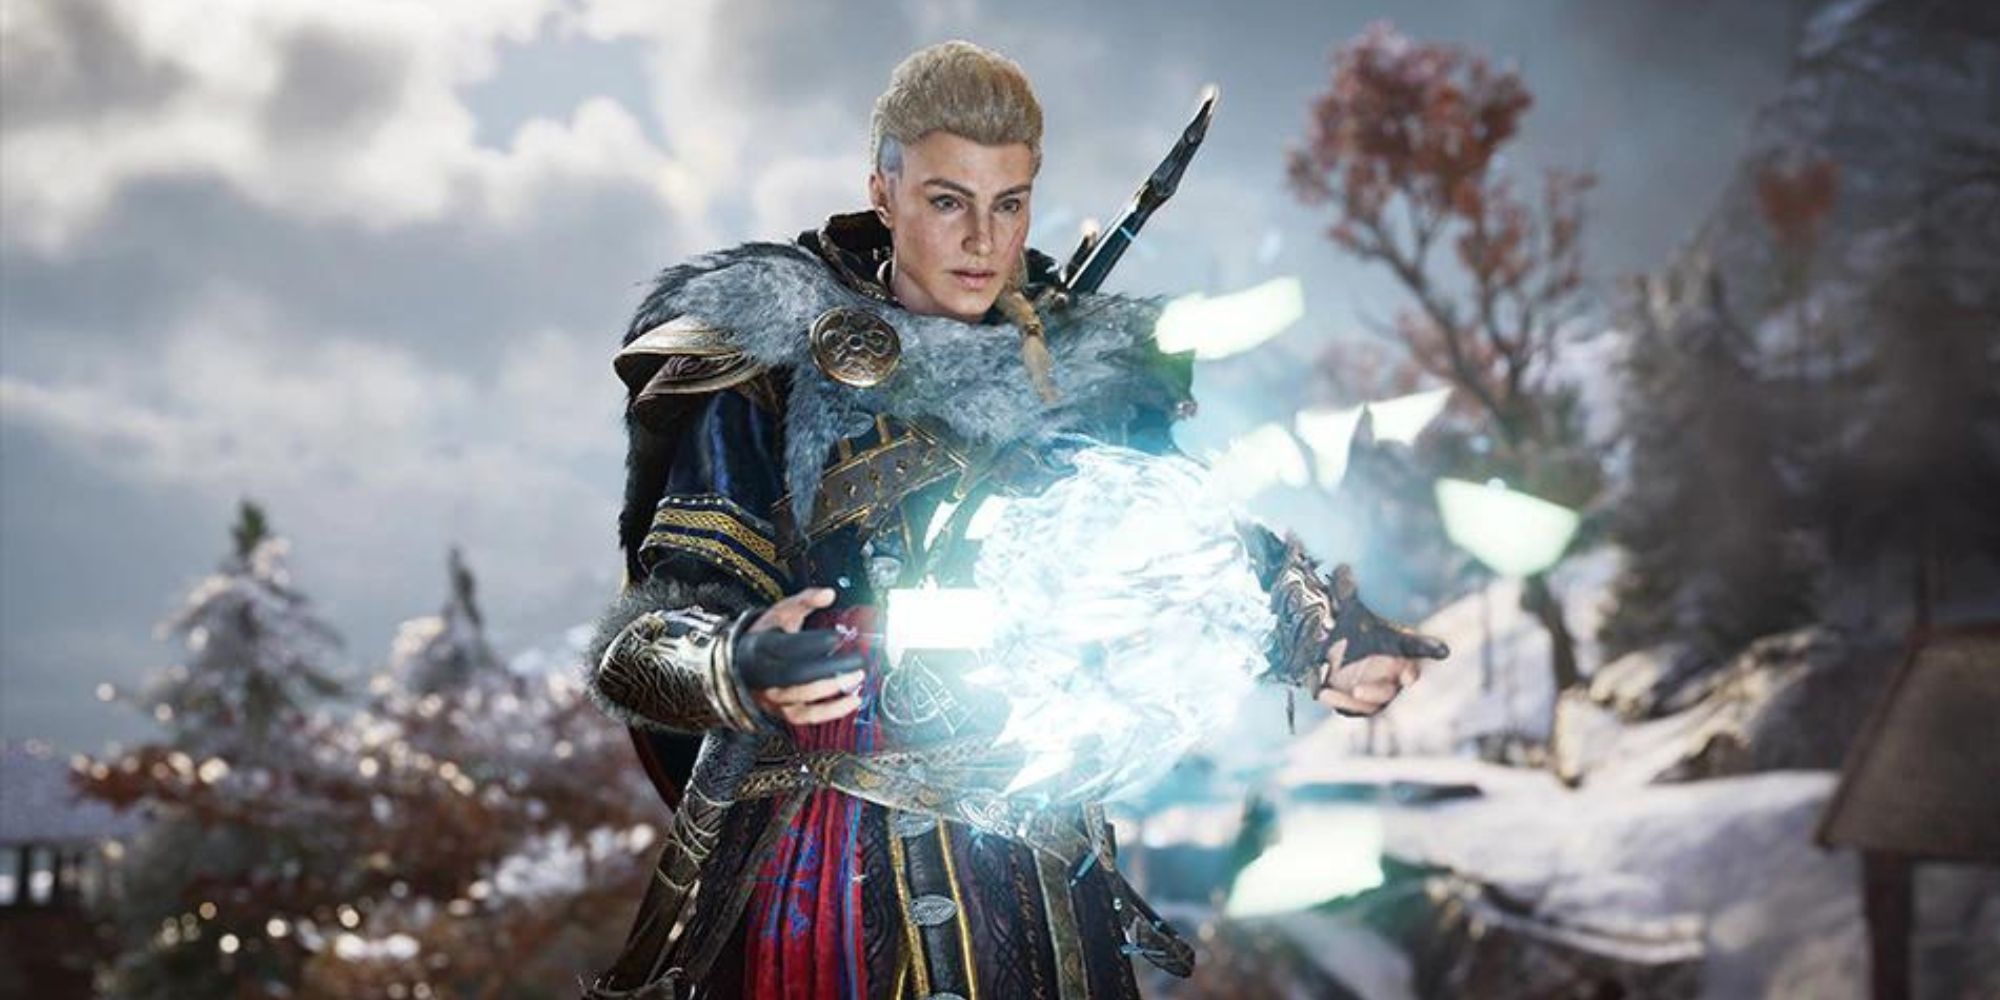 eivor holding a mystical orb in assassin's creed valhalla the last chapter dlc which has released early